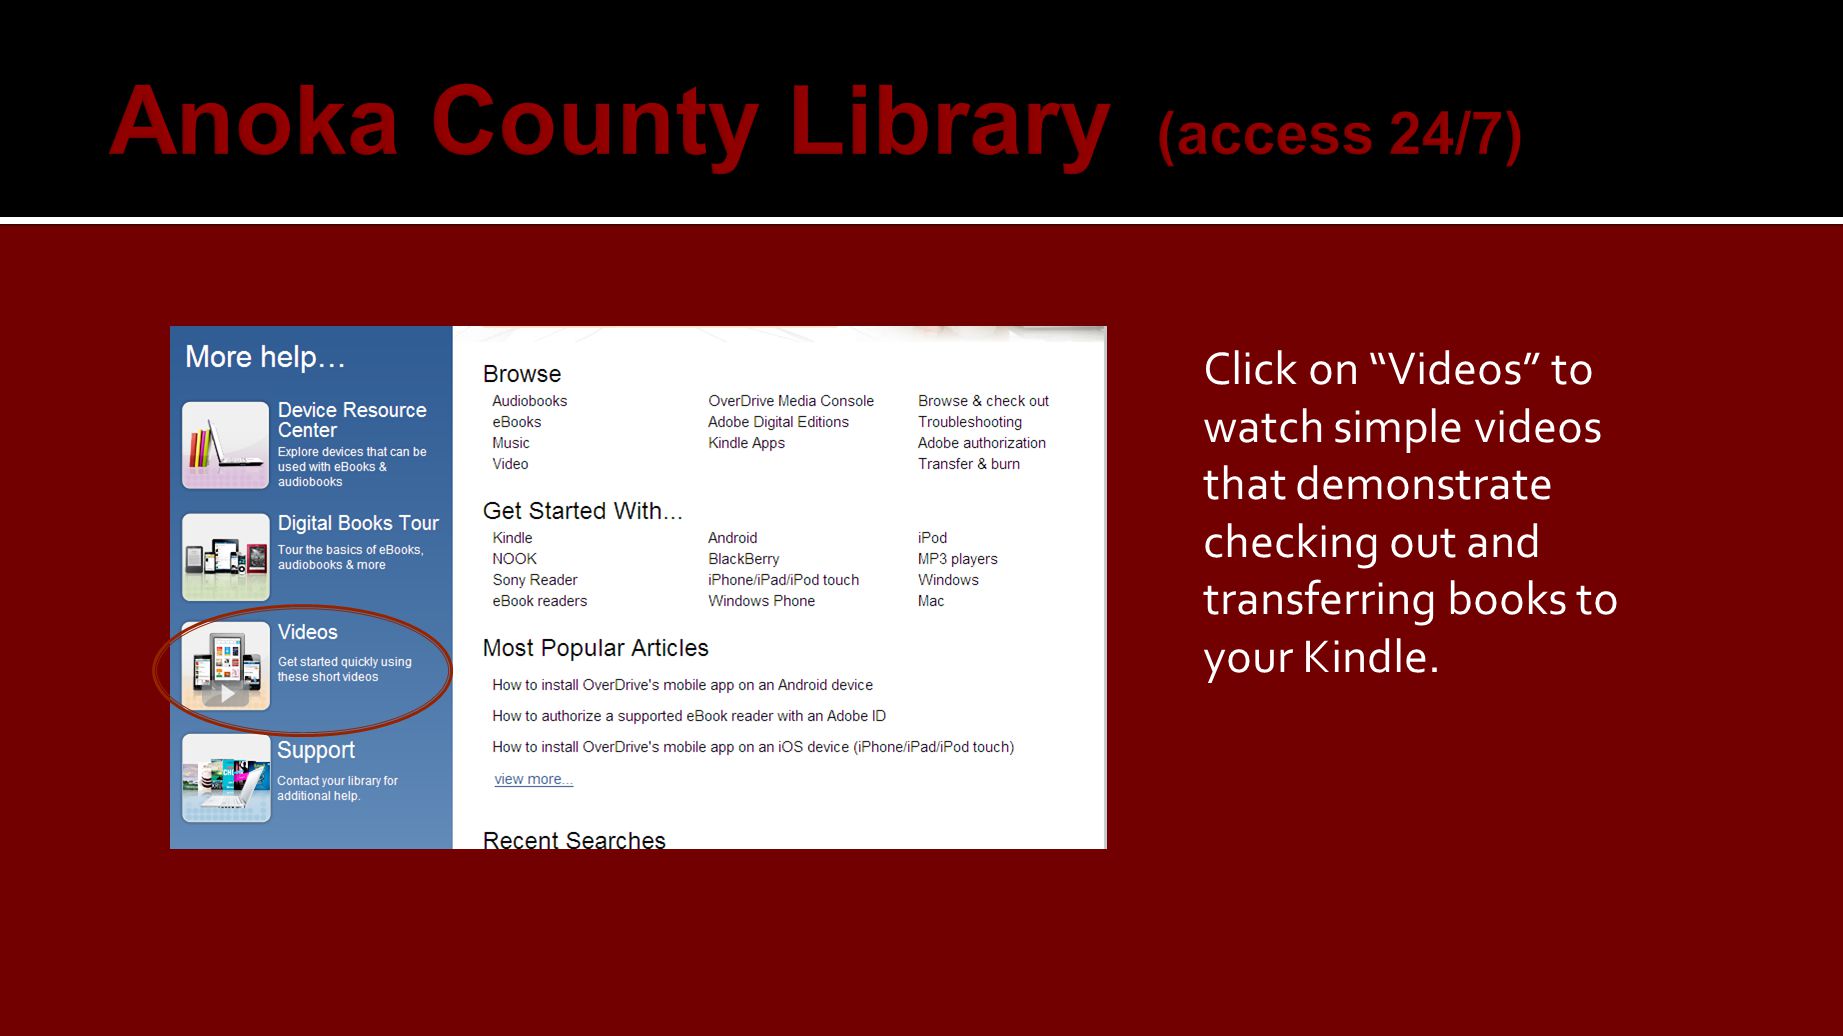 Click on Videos to watch simple videos that demonstrate checking out and transferring books to your Kindle.